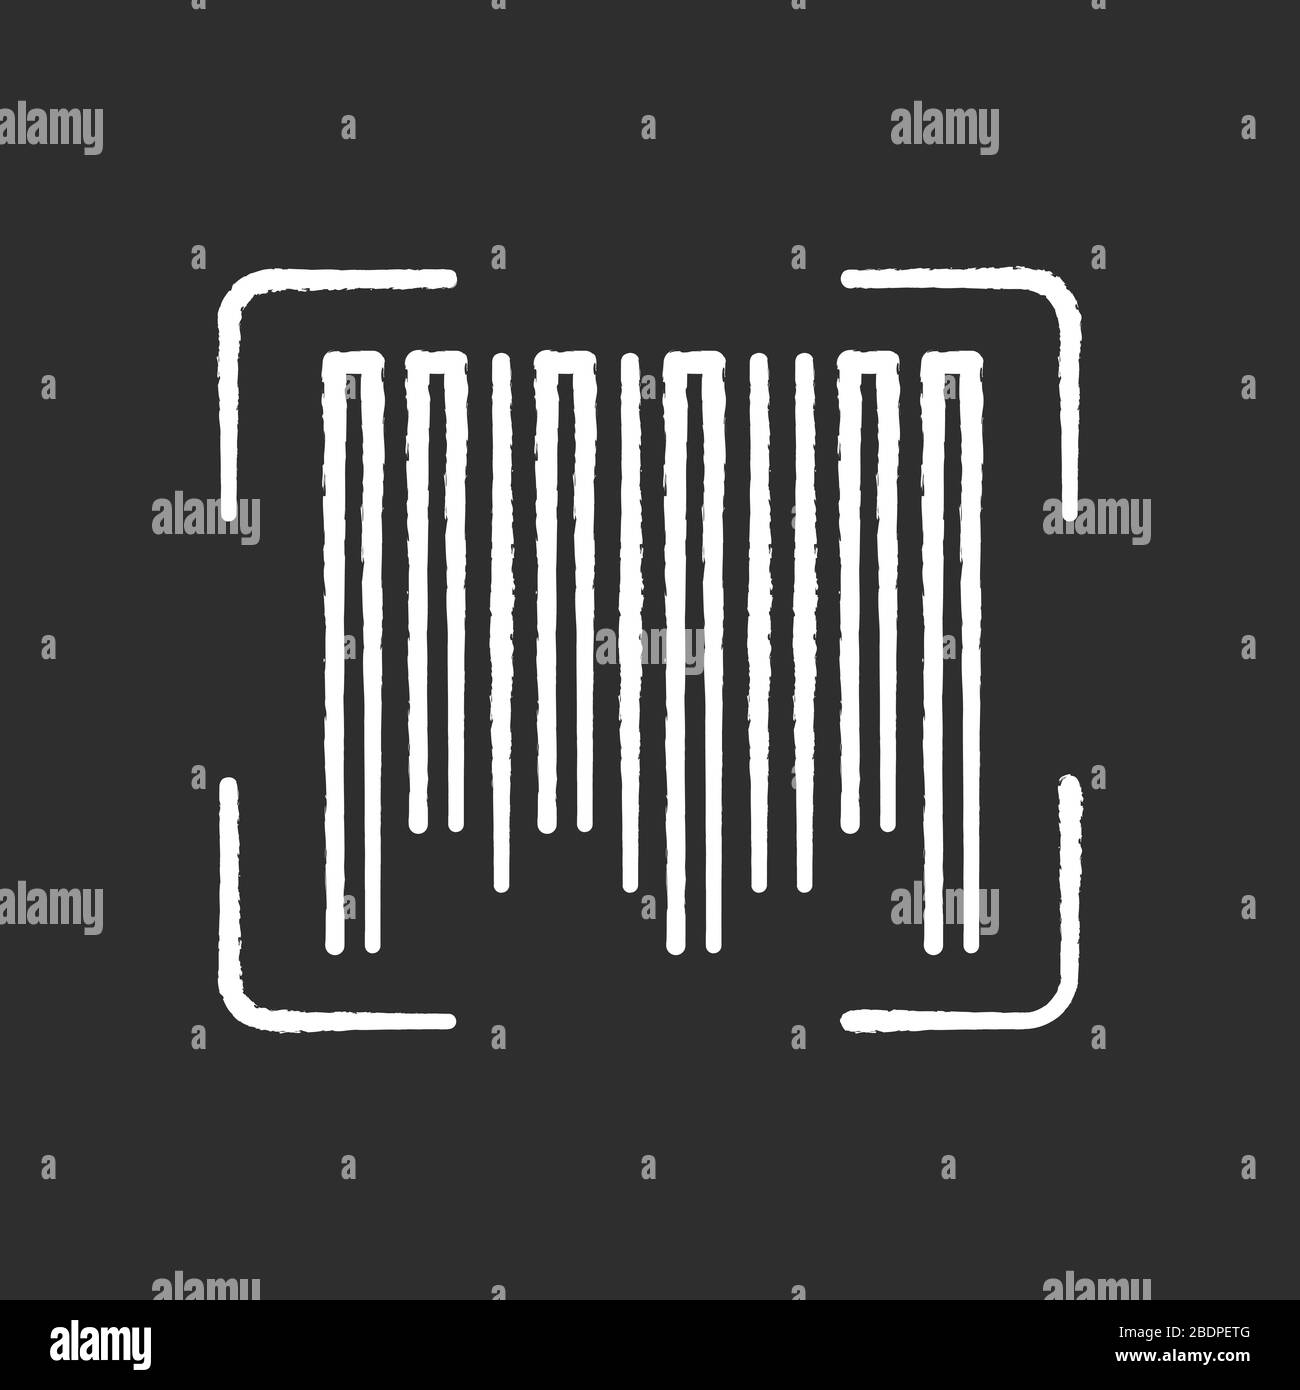 Barcode chalk white icon on black background. Universal product code ...